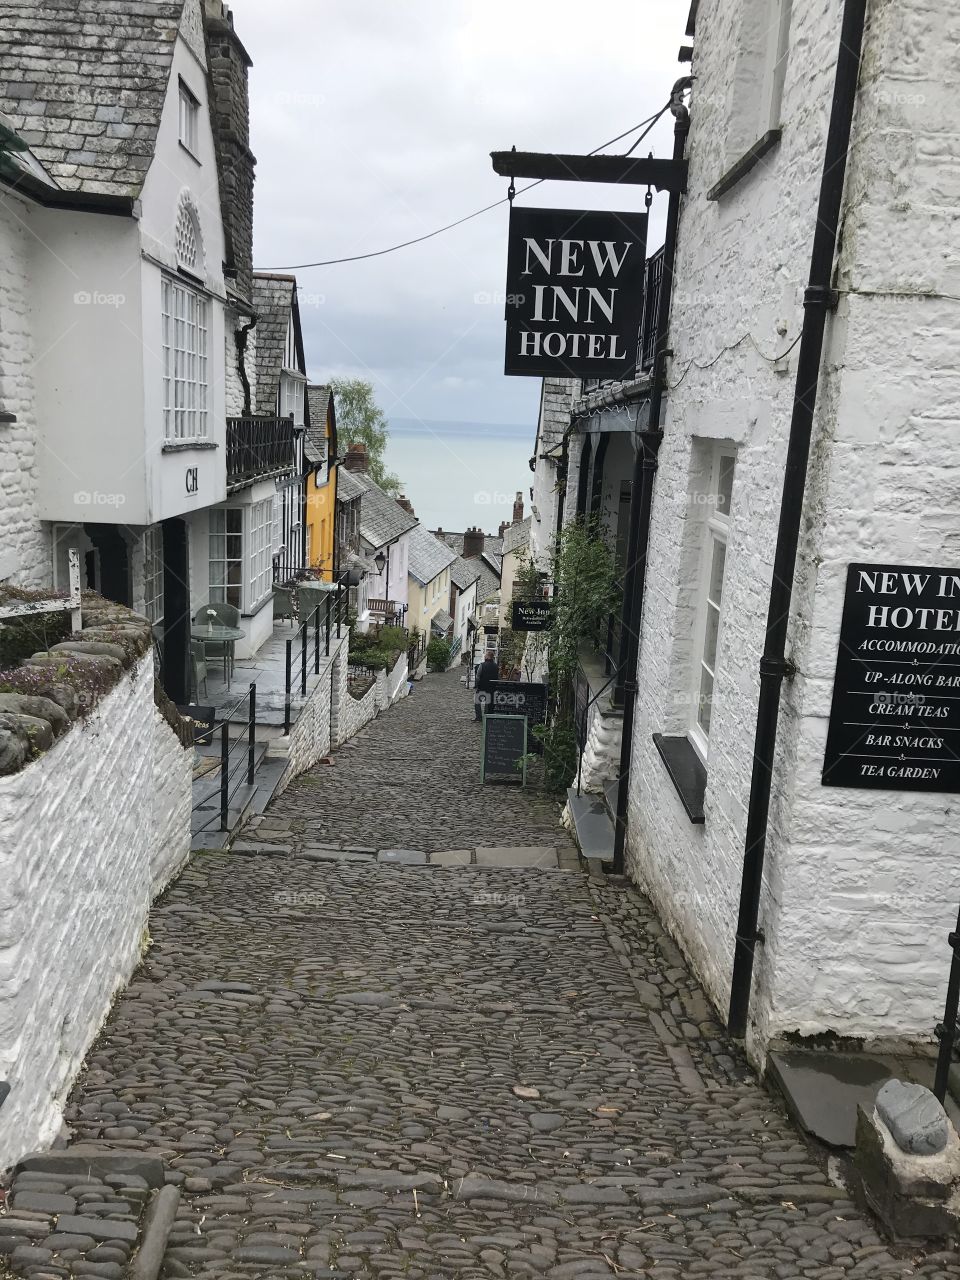 There are only a couple of hotels here in Clovelly, this one is set almost in the centre of this cobbled wonderland.